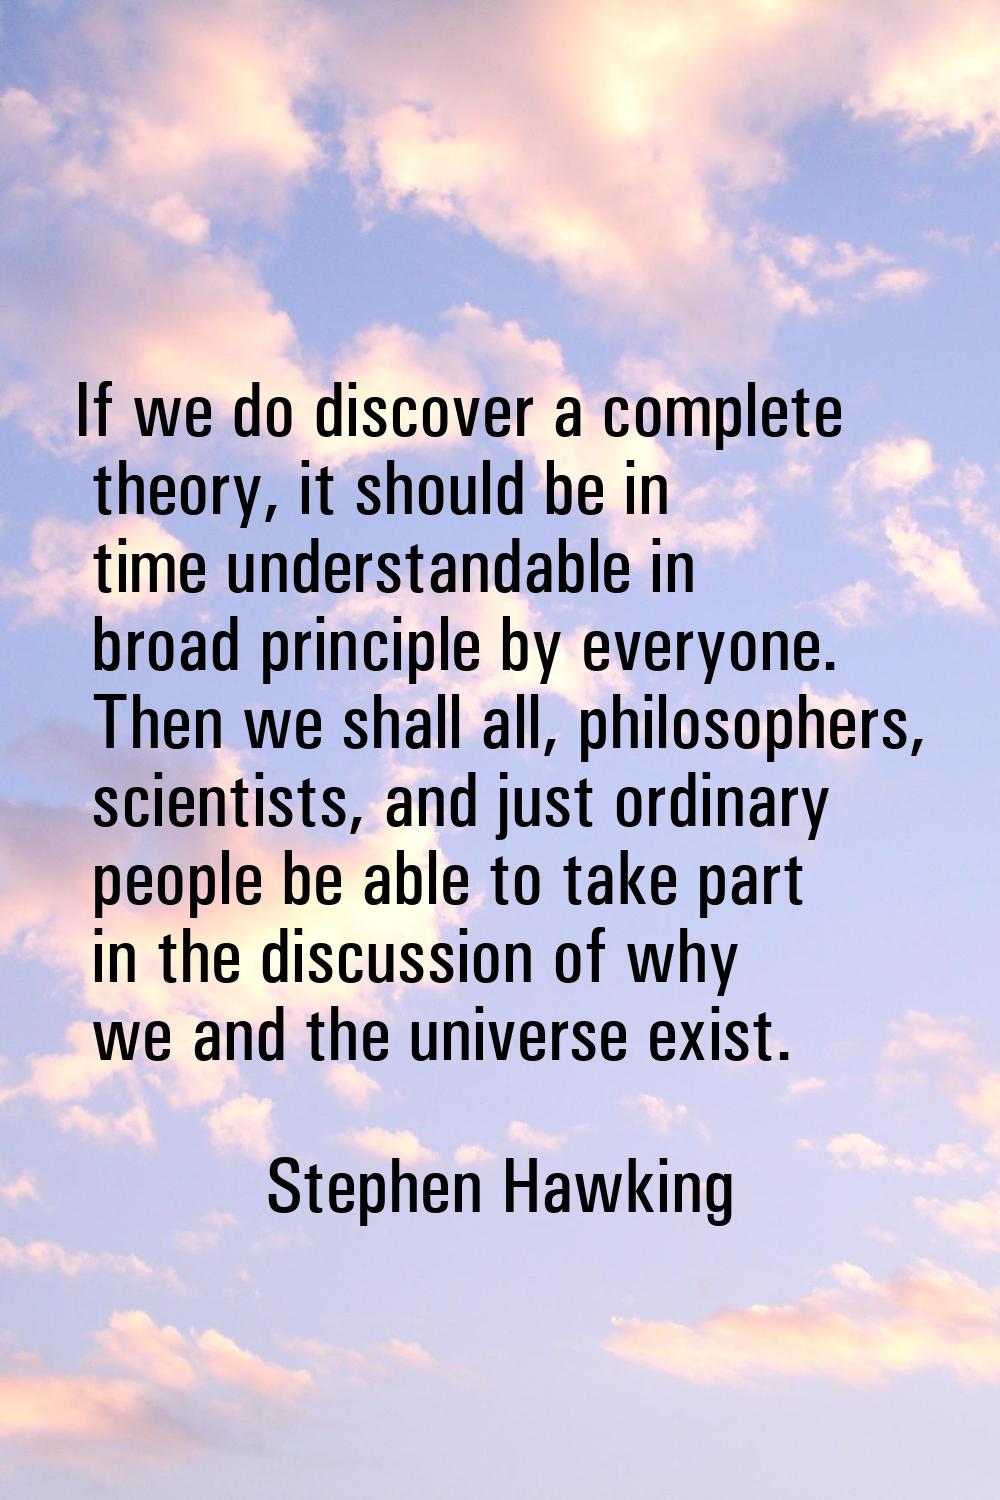 If we do discover a complete theory, it should be in time understandable in broad principle by ever